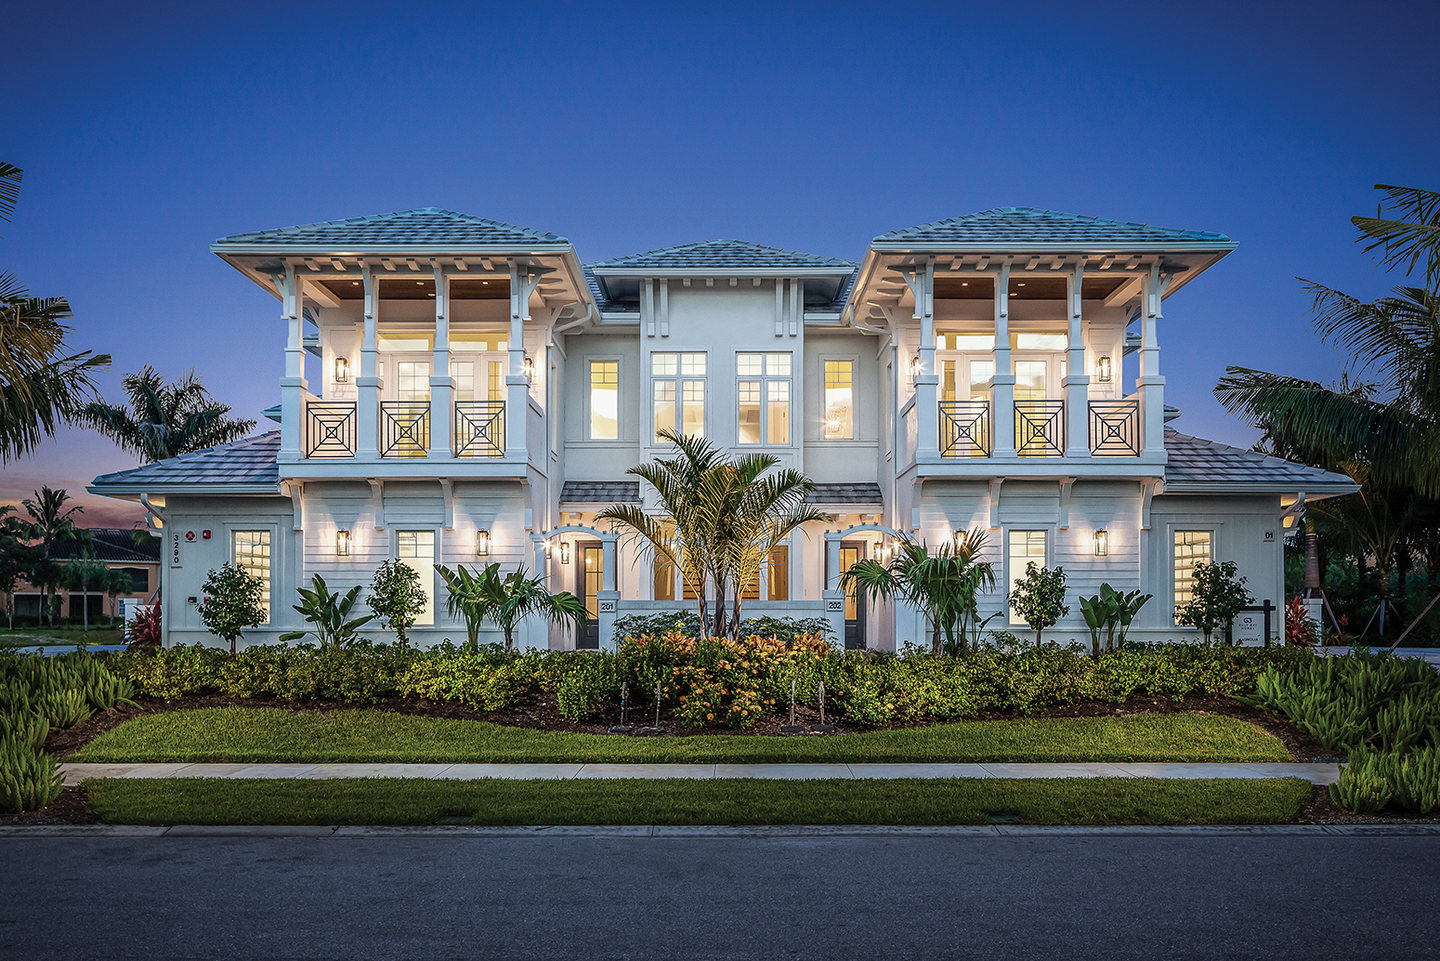 360 VR Virtual Tours of the Gulf Bay Homes | Magnolia Model